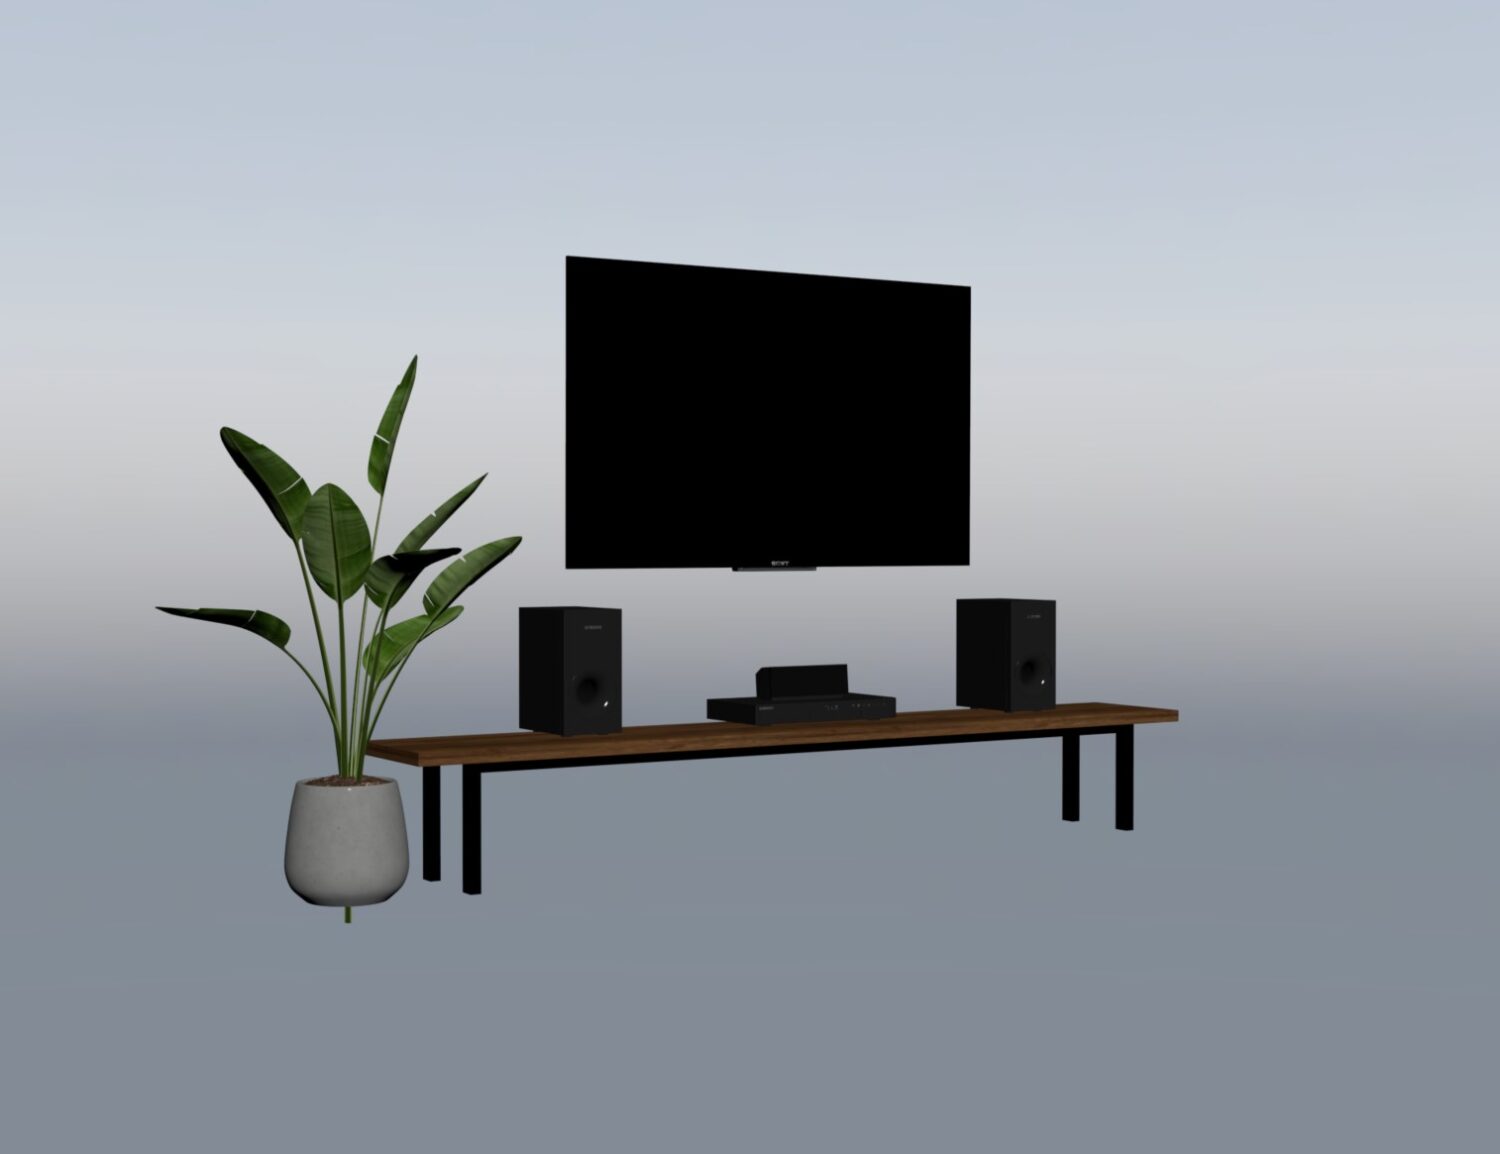 9850. Free 3D TV Cabinet Model Download by Pham Hai